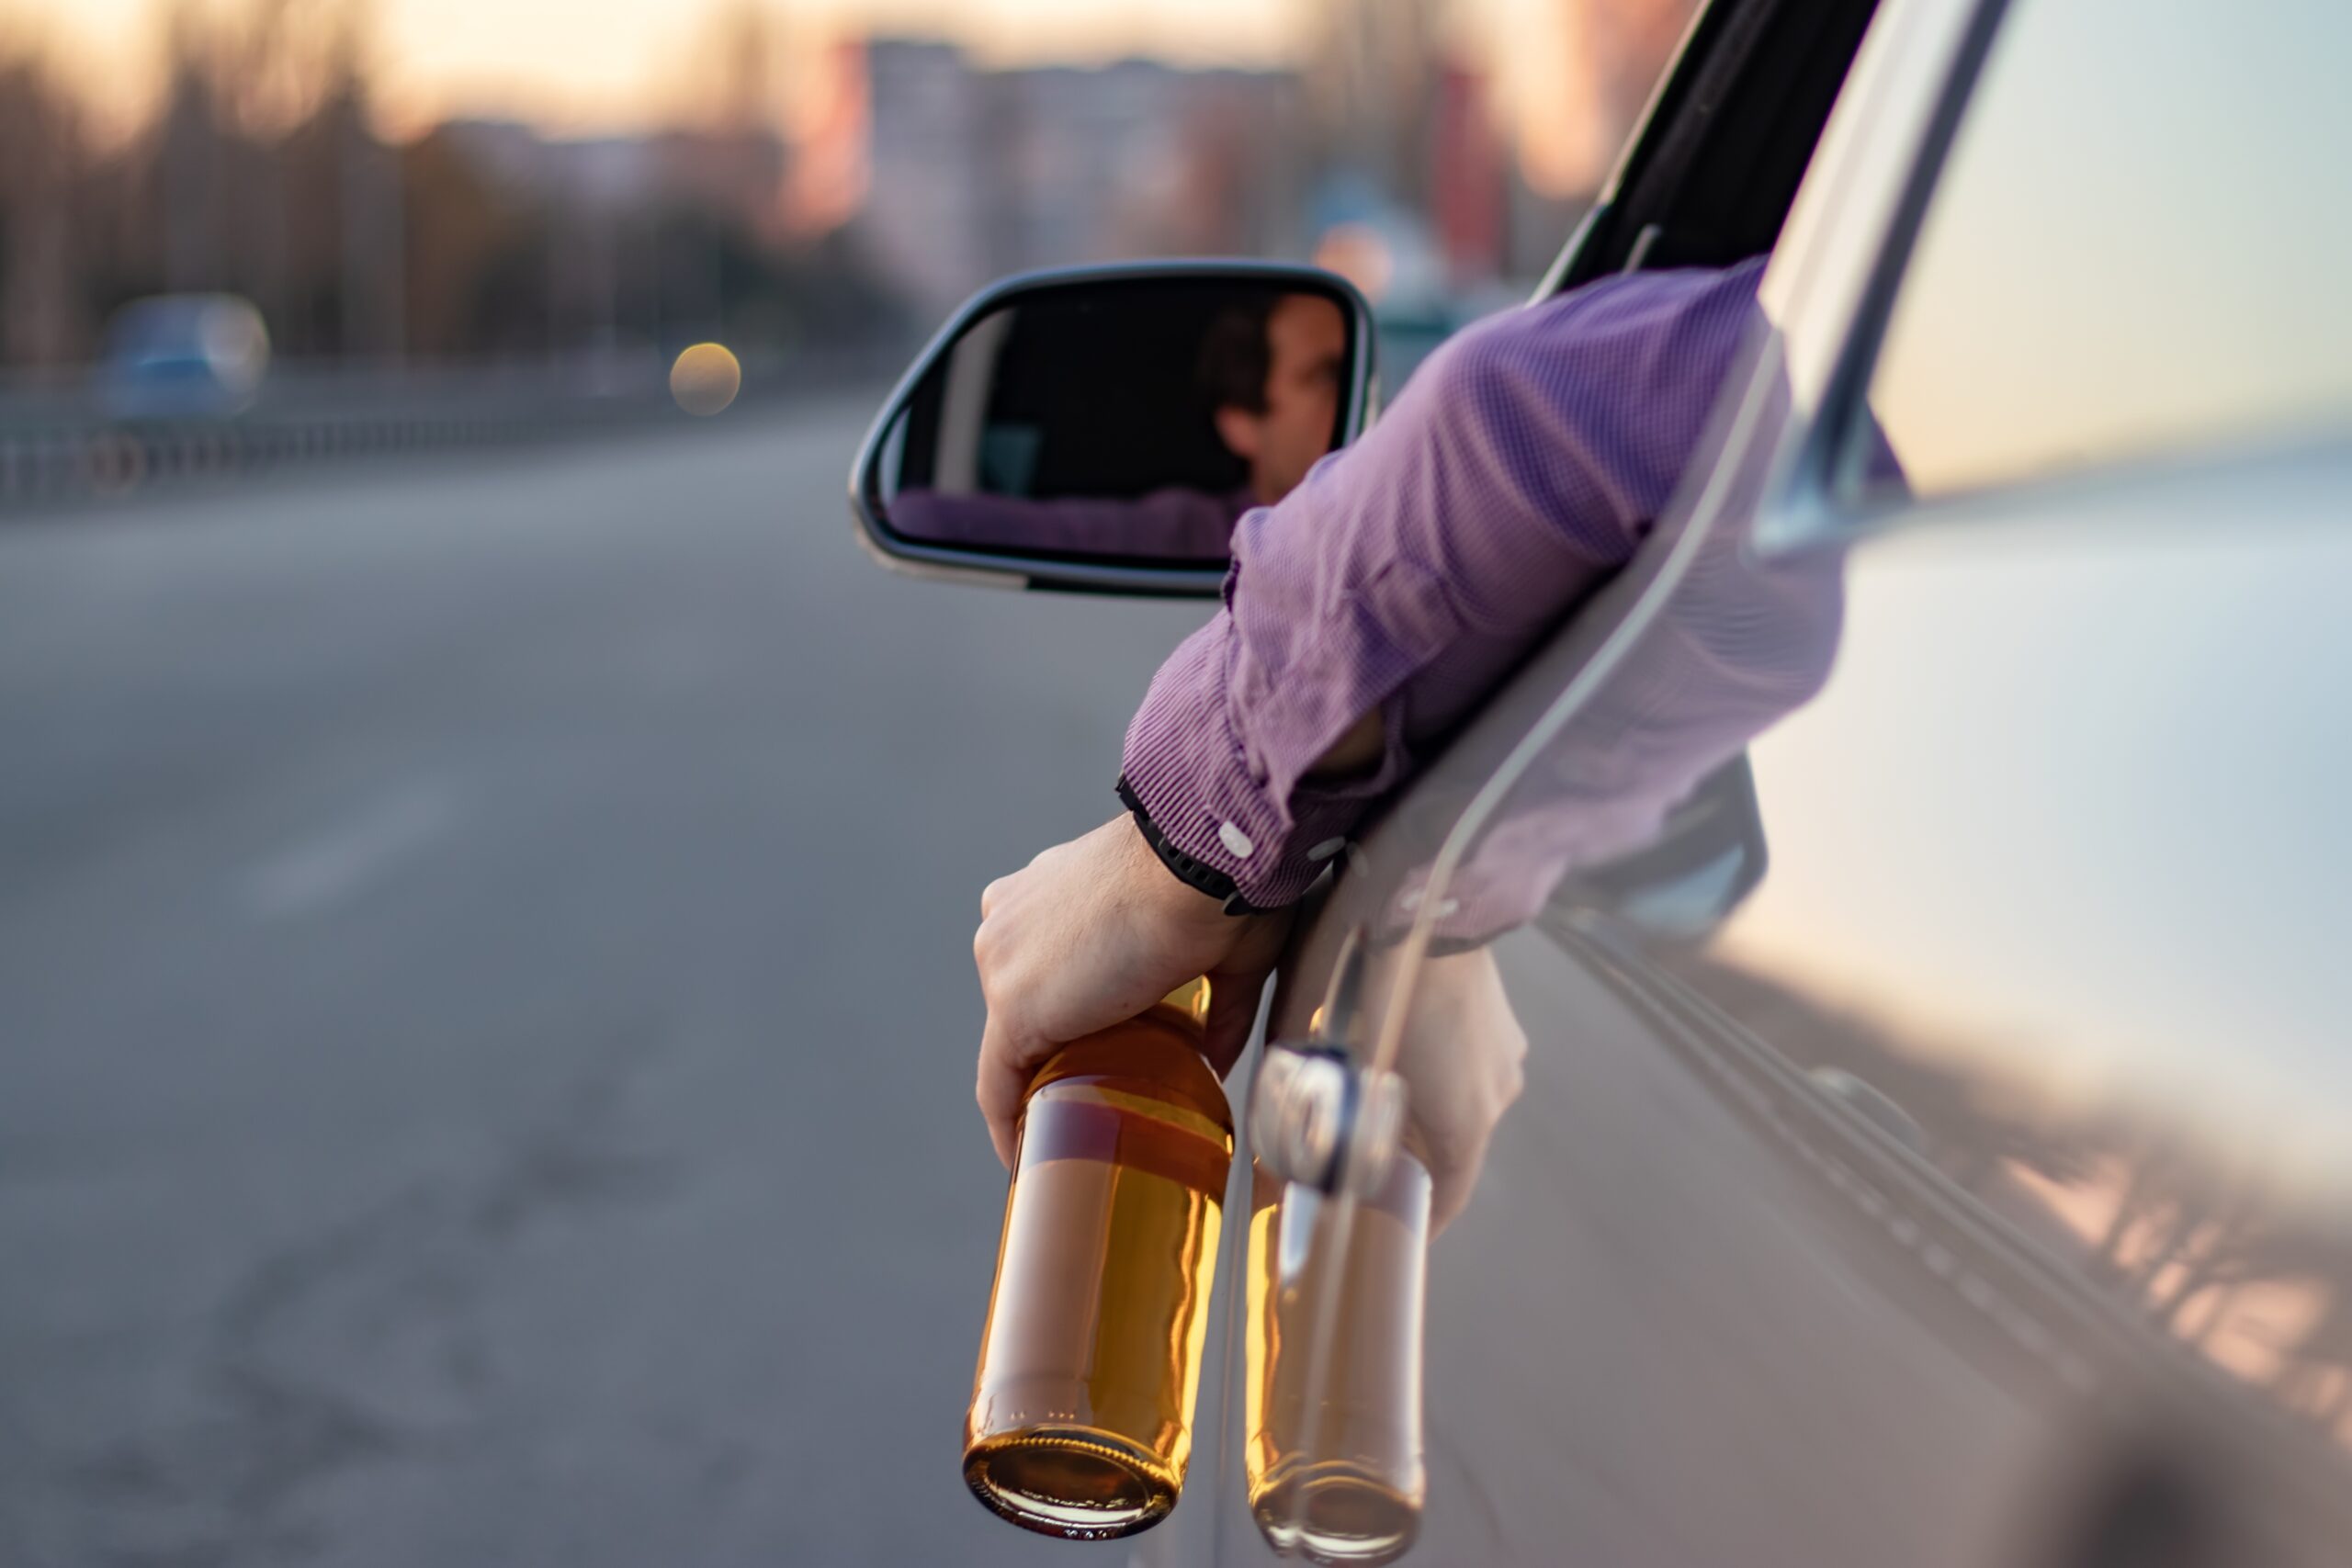 How Long do I Have to File a Lawsuit After a Drunk Driving Accident?